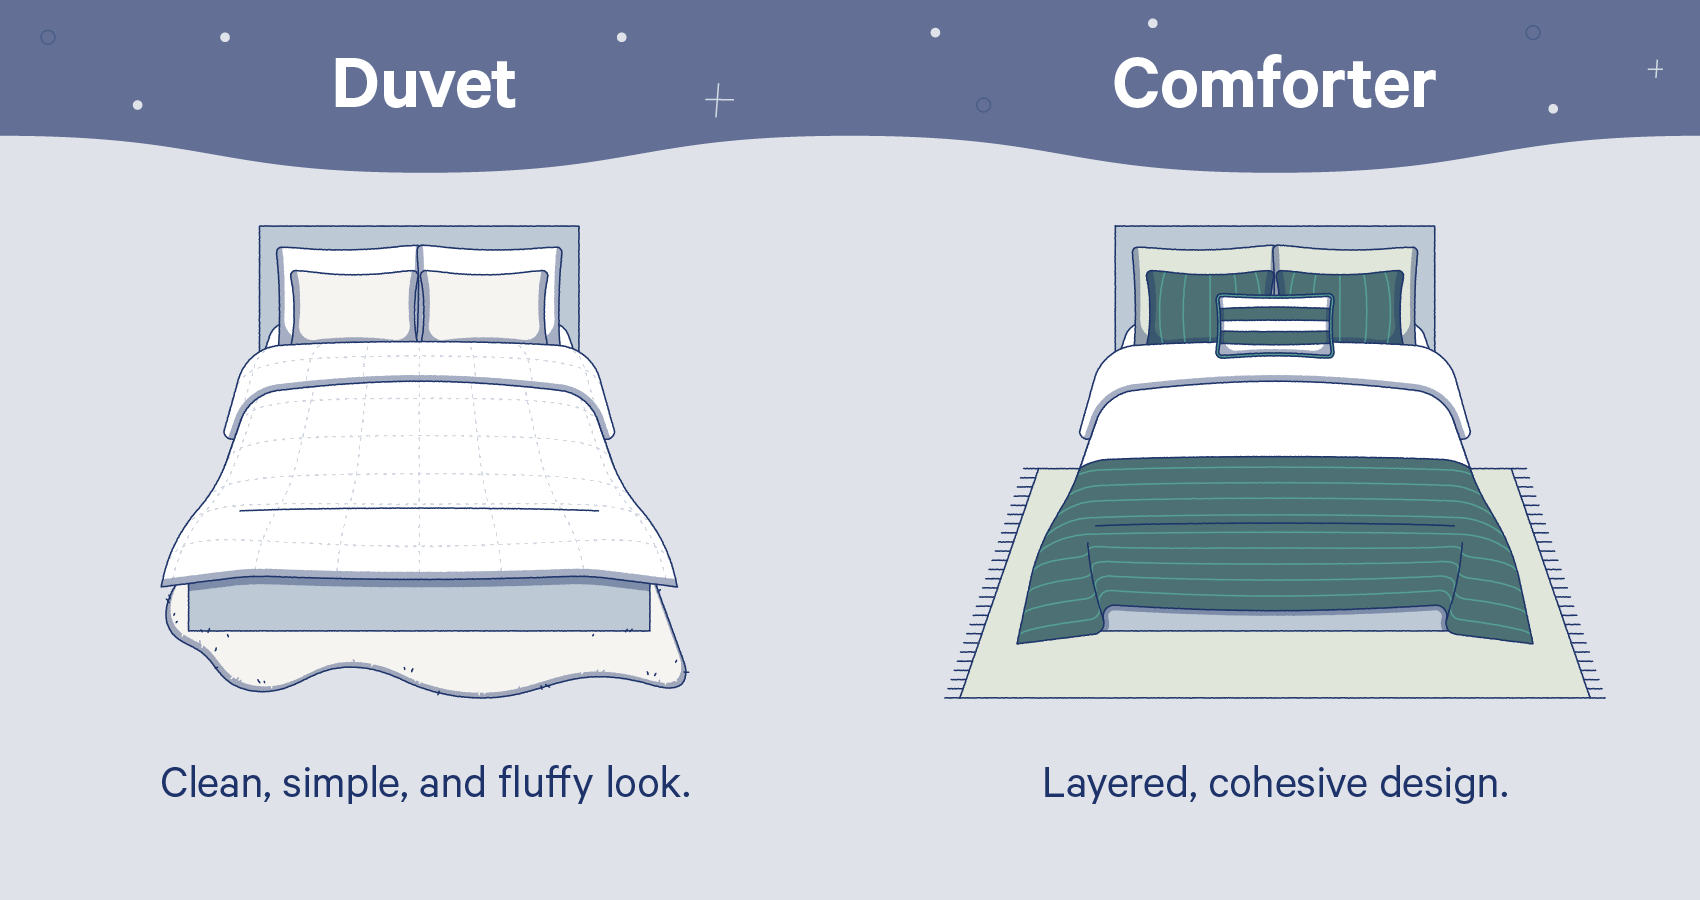 comforter: what"s the difference?